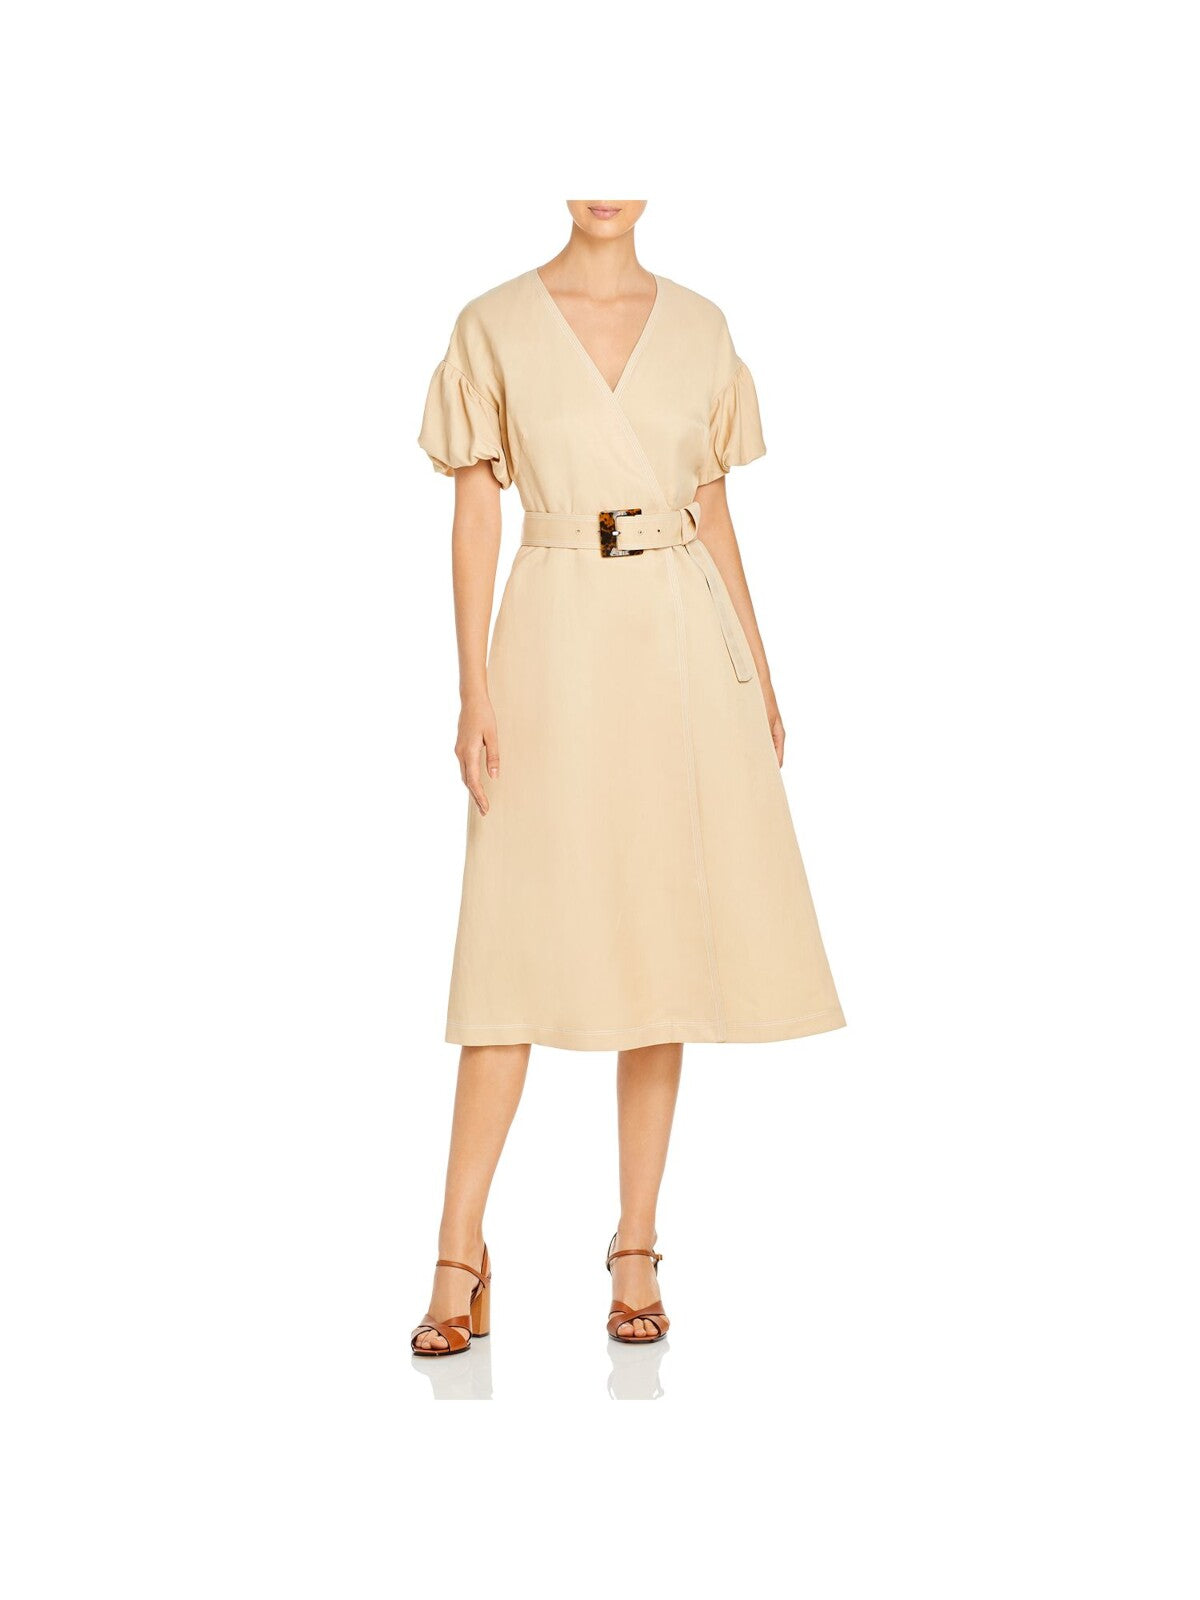 LAFAYETTE 148 Womens Belted Darted Side Pockets Button Front Closur Short Sleeve V Neck Knee Length Party Faux Wrap Dress